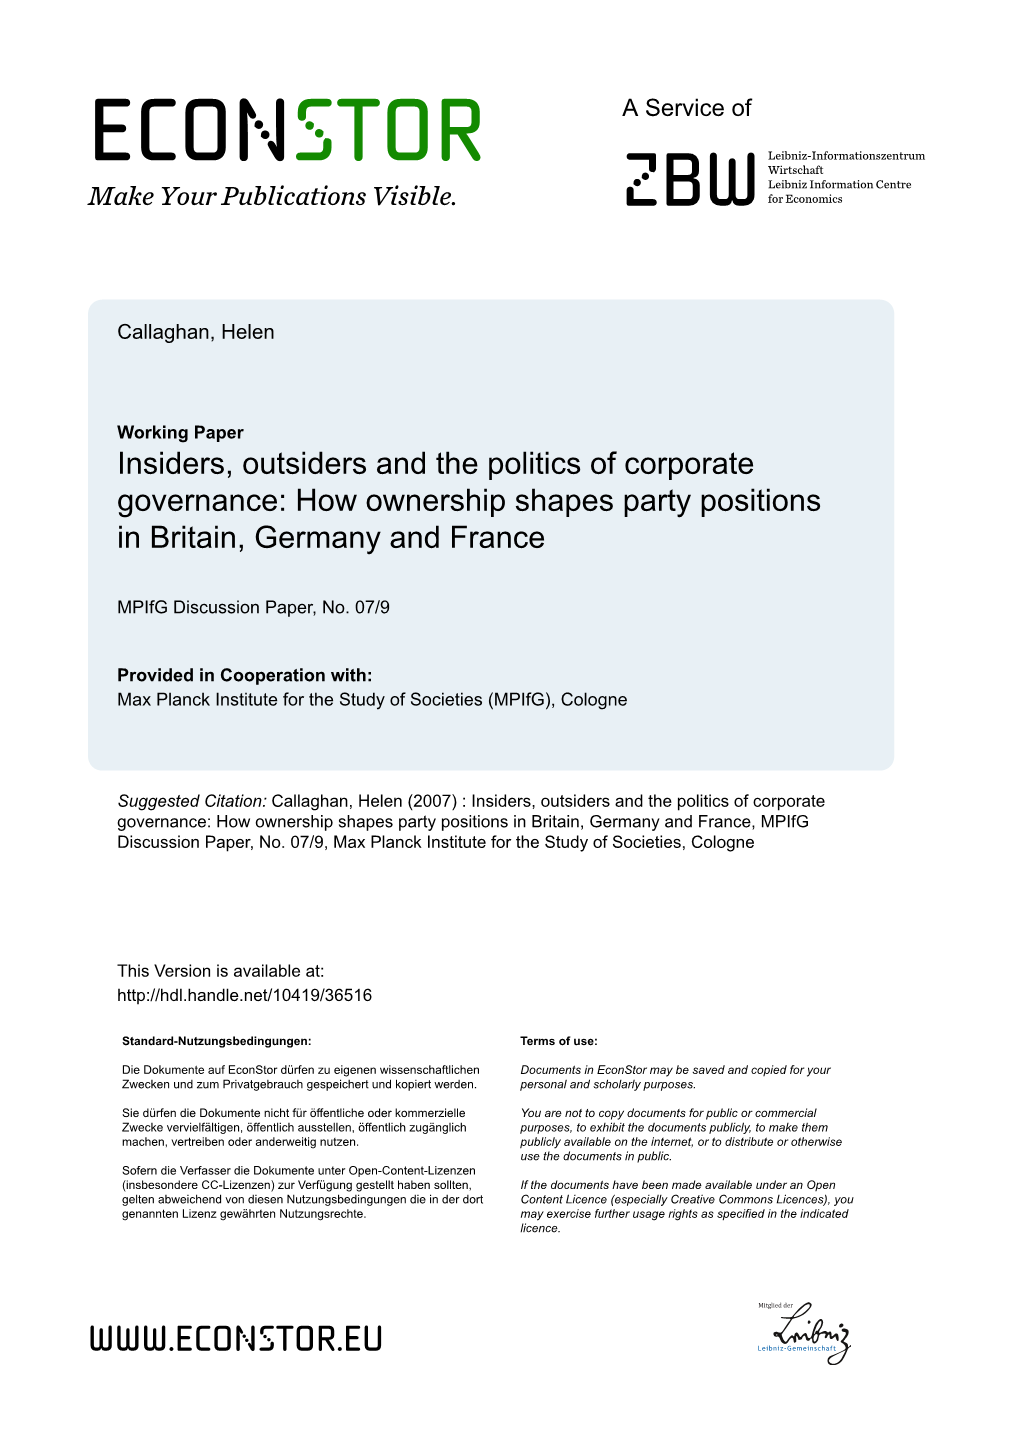 How Ownership Shapes Party Positions in Britain, Germany and France